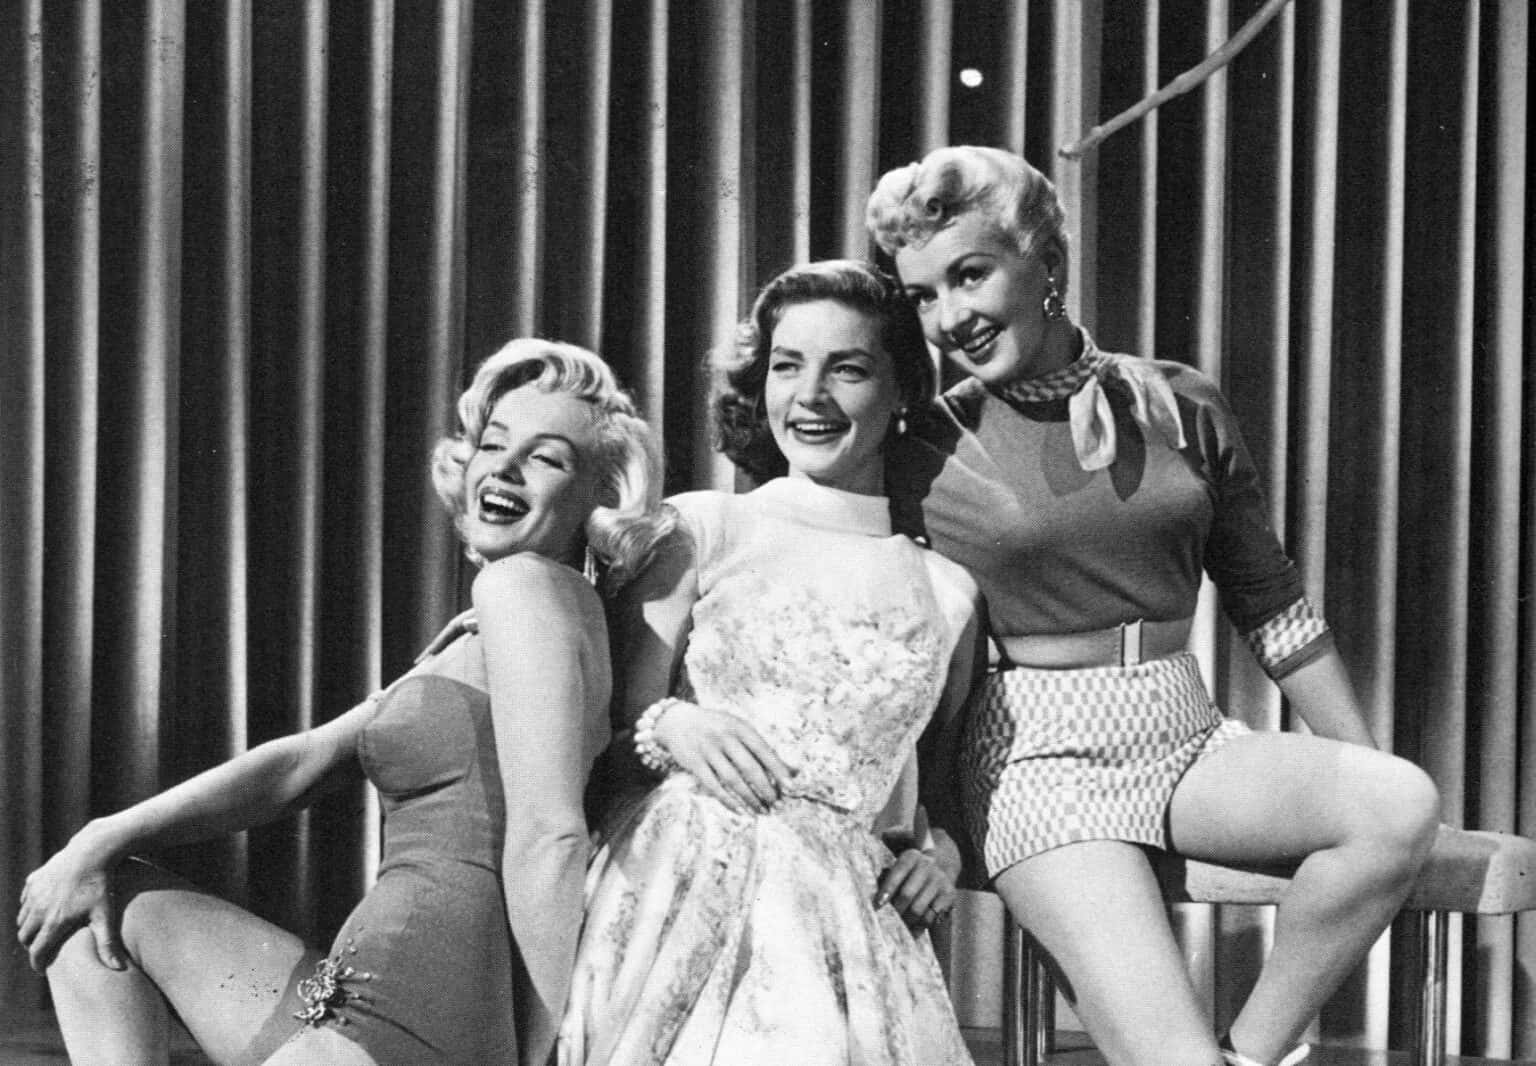 Classic Facts About Marilyn Monroe Hollywoods Iconic Bombshell